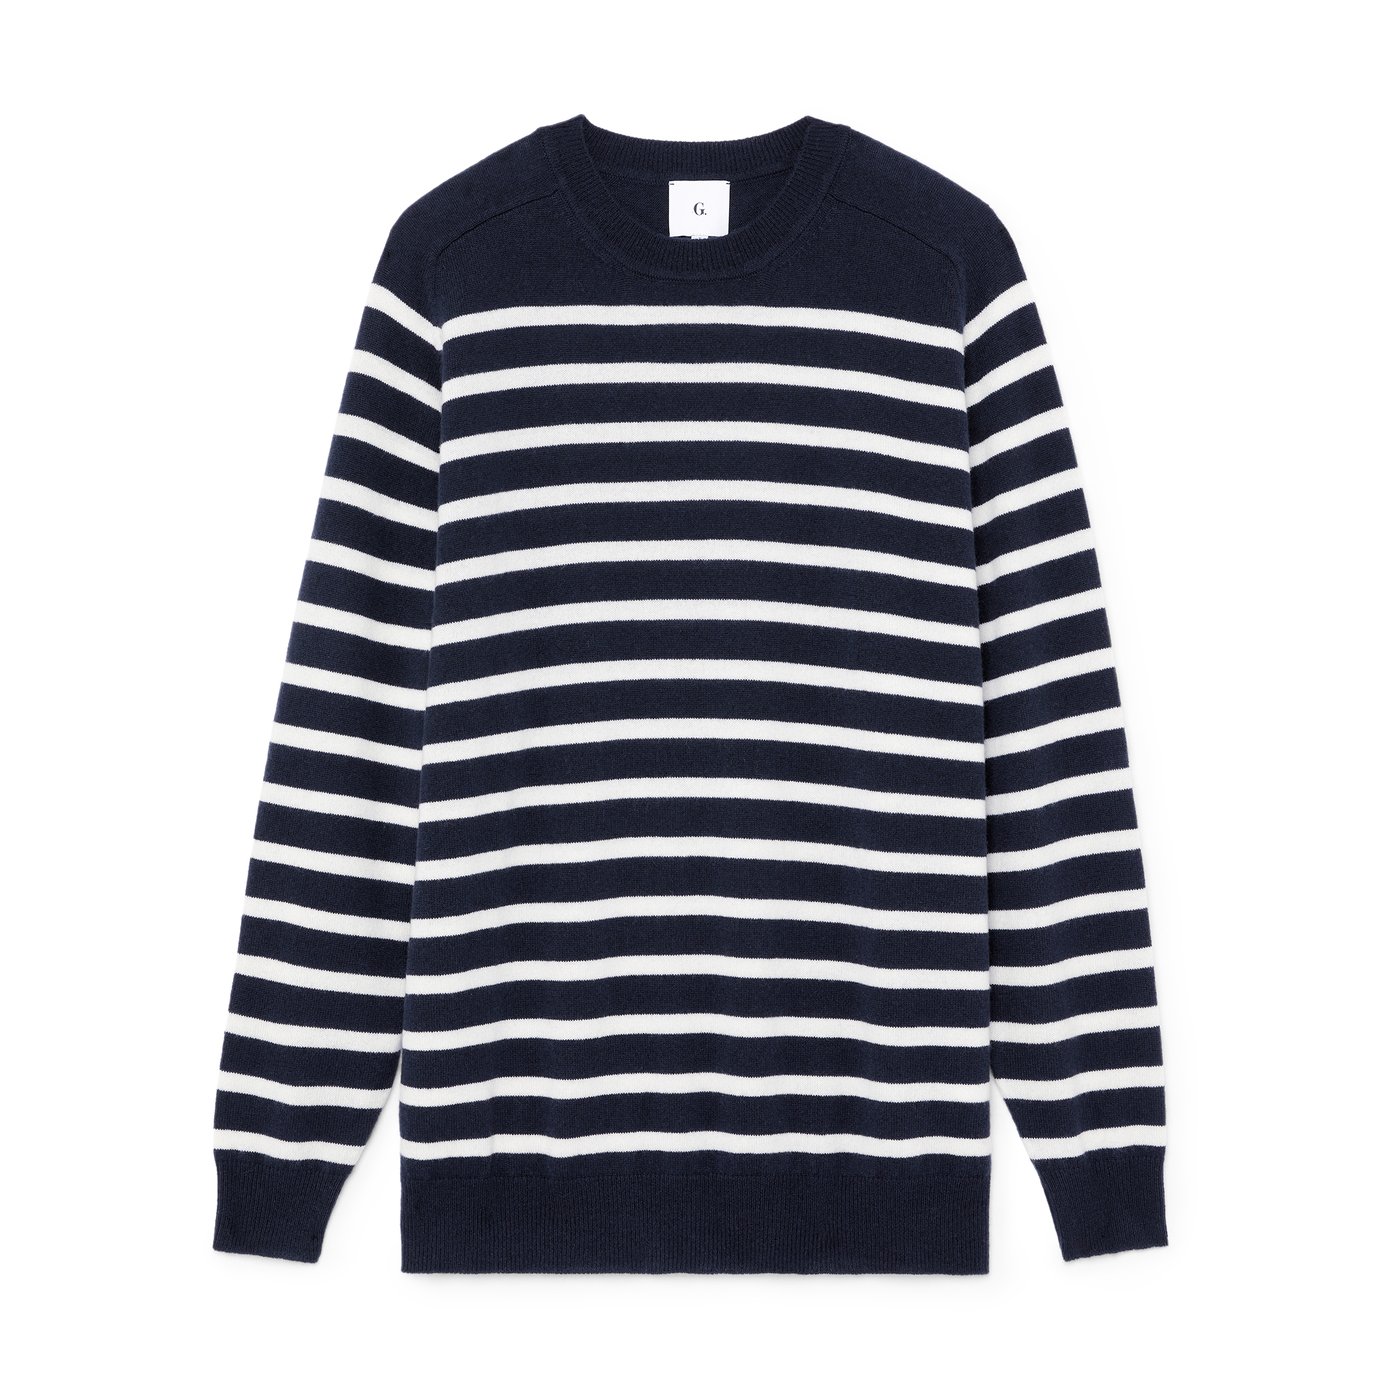 G. Label by goop Gia Oversize Striped Cashmere Crewneck | goop